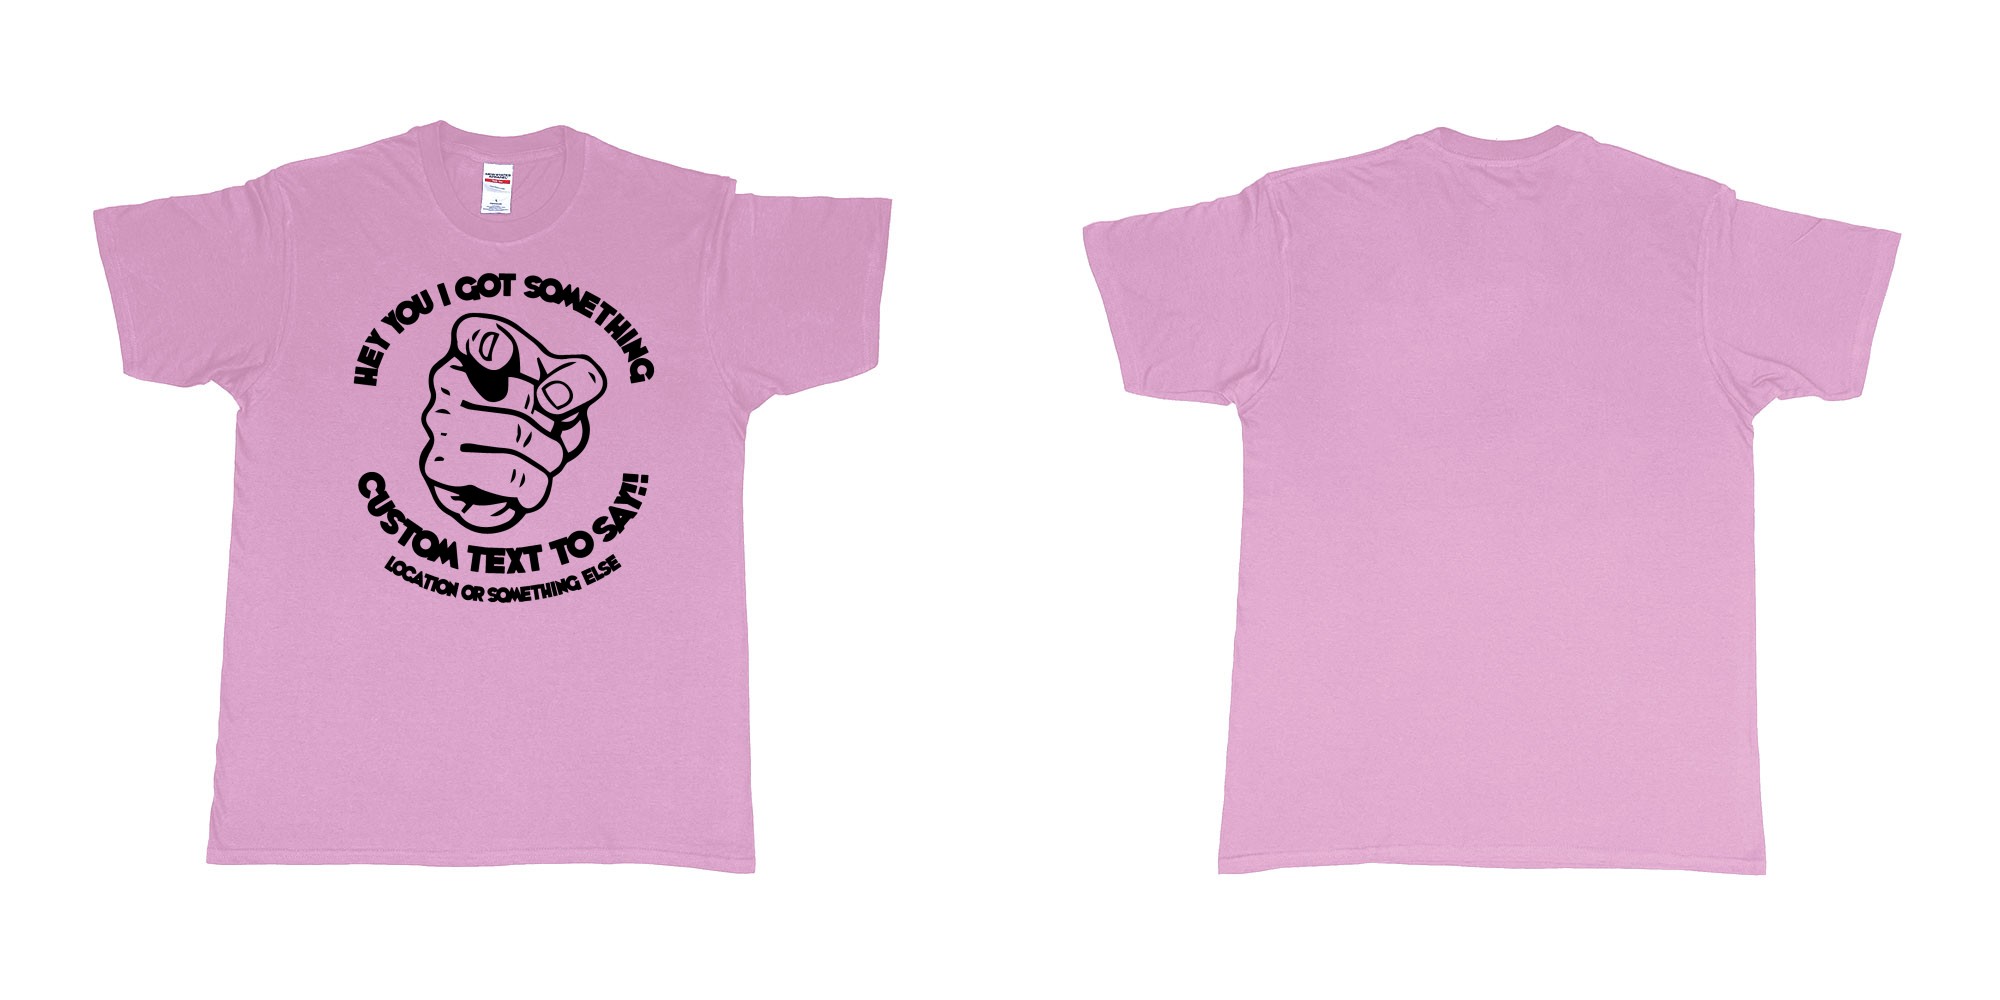 Custom tshirt design finger pointing at you with custom text to say in fabric color light-pink choice your own text made in Bali by The Pirate Way